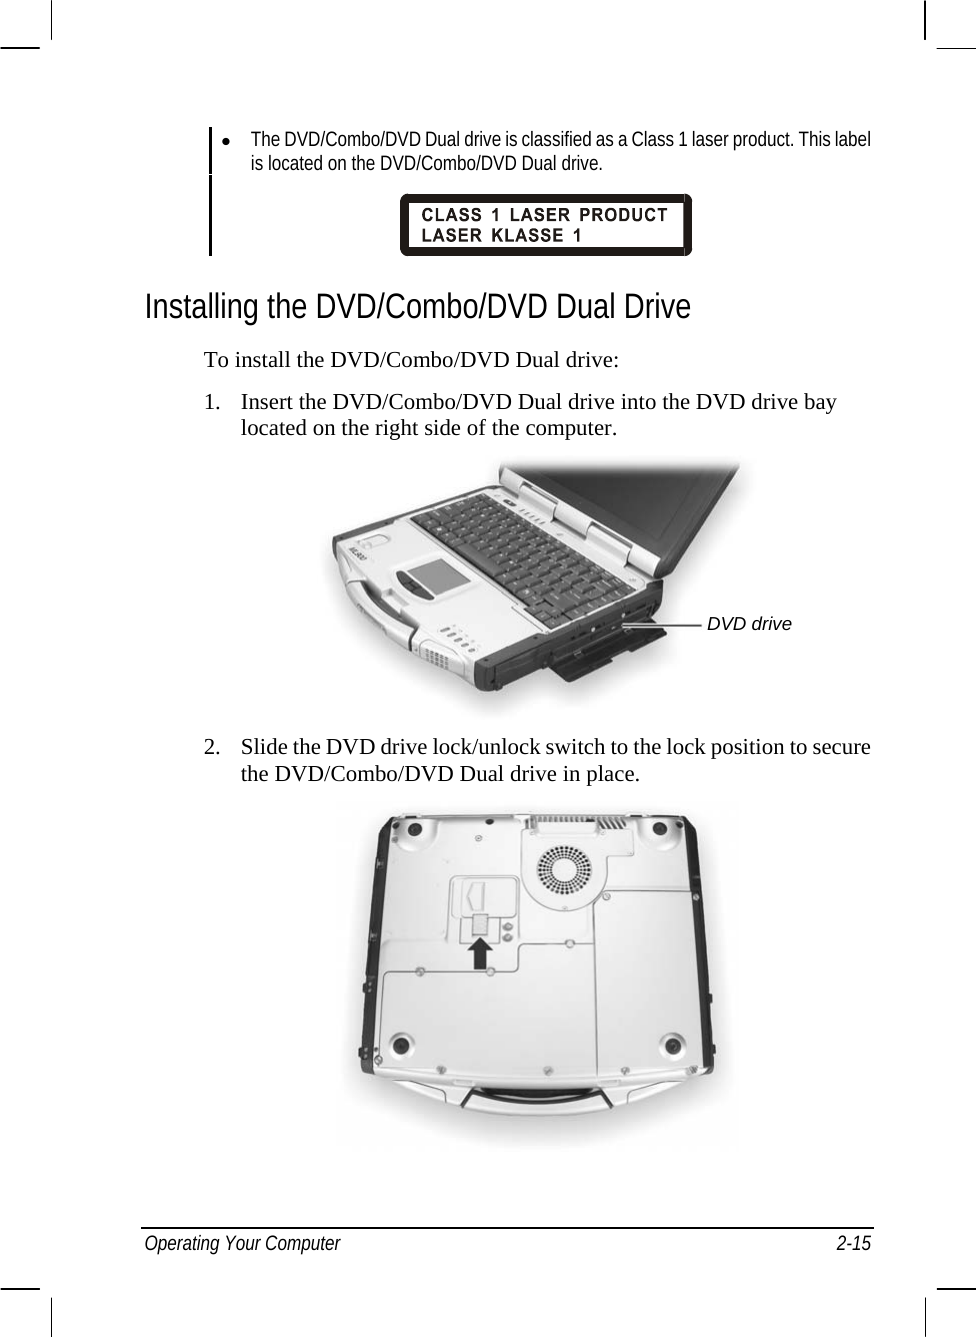  z The DVD/Combo/DVD Dual drive is classified as a Class 1 laser product. This label is located on the DVD/Combo/DVD Dual drive.   Installing the DVD/Combo/DVD Dual Drive To install the DVD/Combo/DVD Dual drive: 1. Insert the DVD/Combo/DVD Dual drive into the DVD drive bay located on the right side of the computer. DVD drive  2. Slide the DVD drive lock/unlock switch to the lock position to secure the DVD/Combo/DVD Dual drive in place.  Operating Your Computer  2-15 